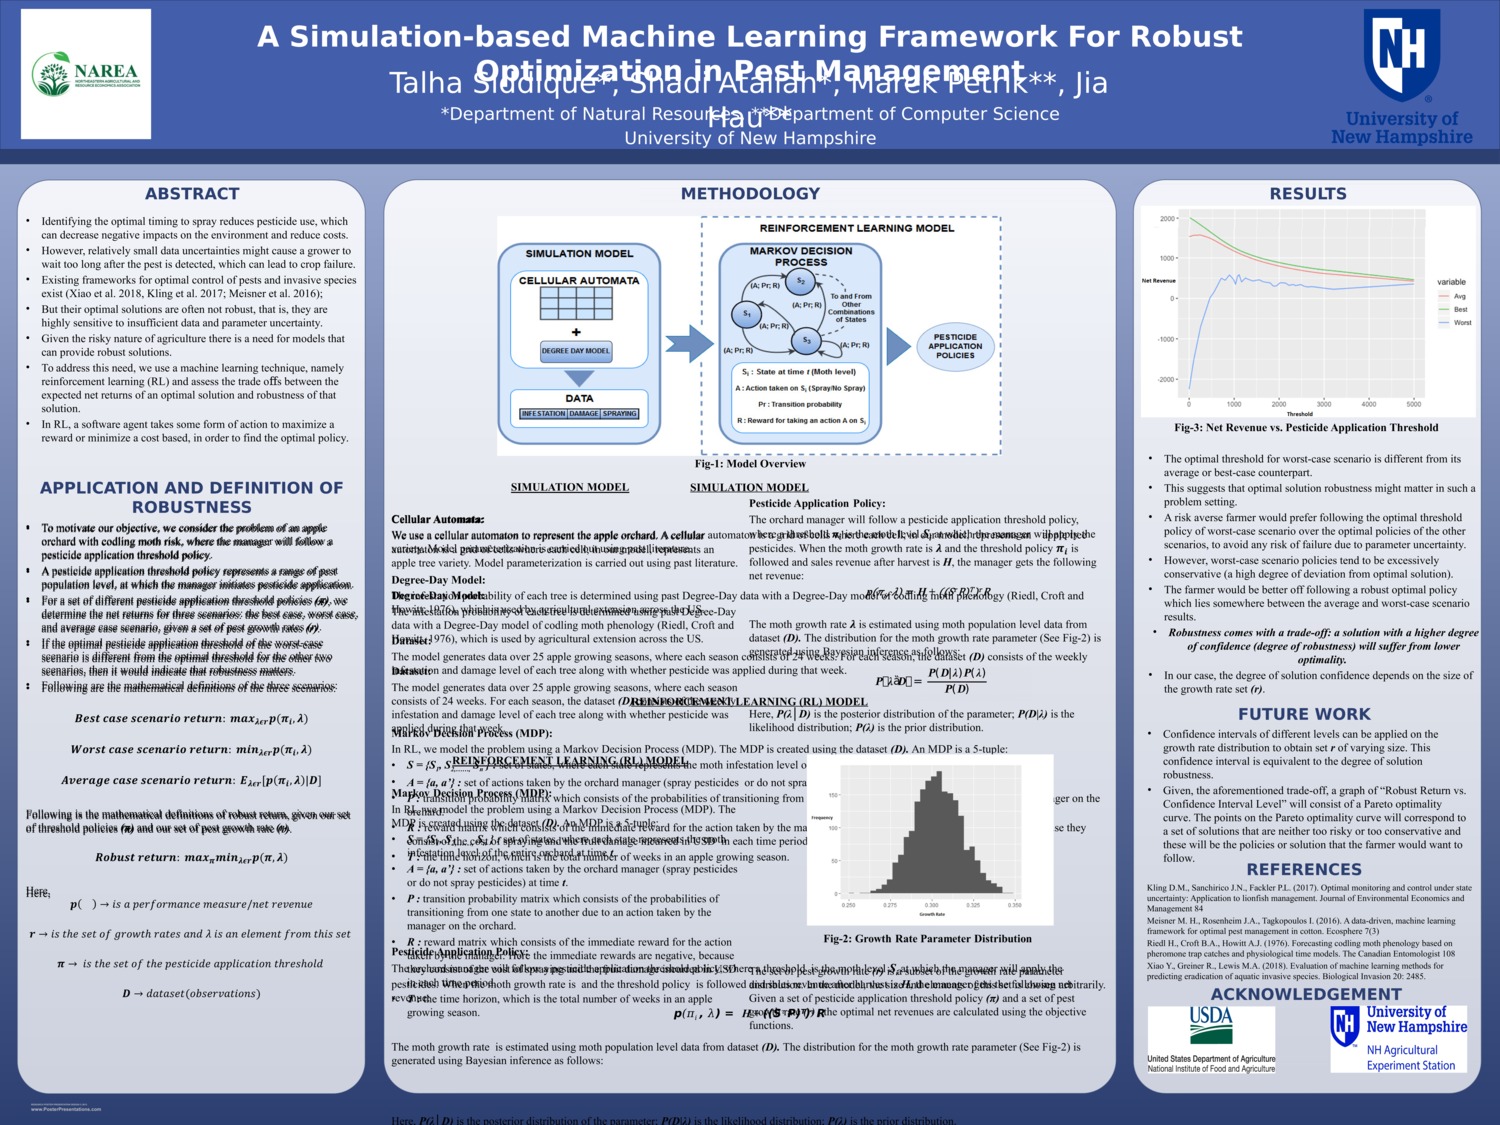 A Simulation-Based, Machine Learning Framework For Robust Optimization In Pest Management by ts1121